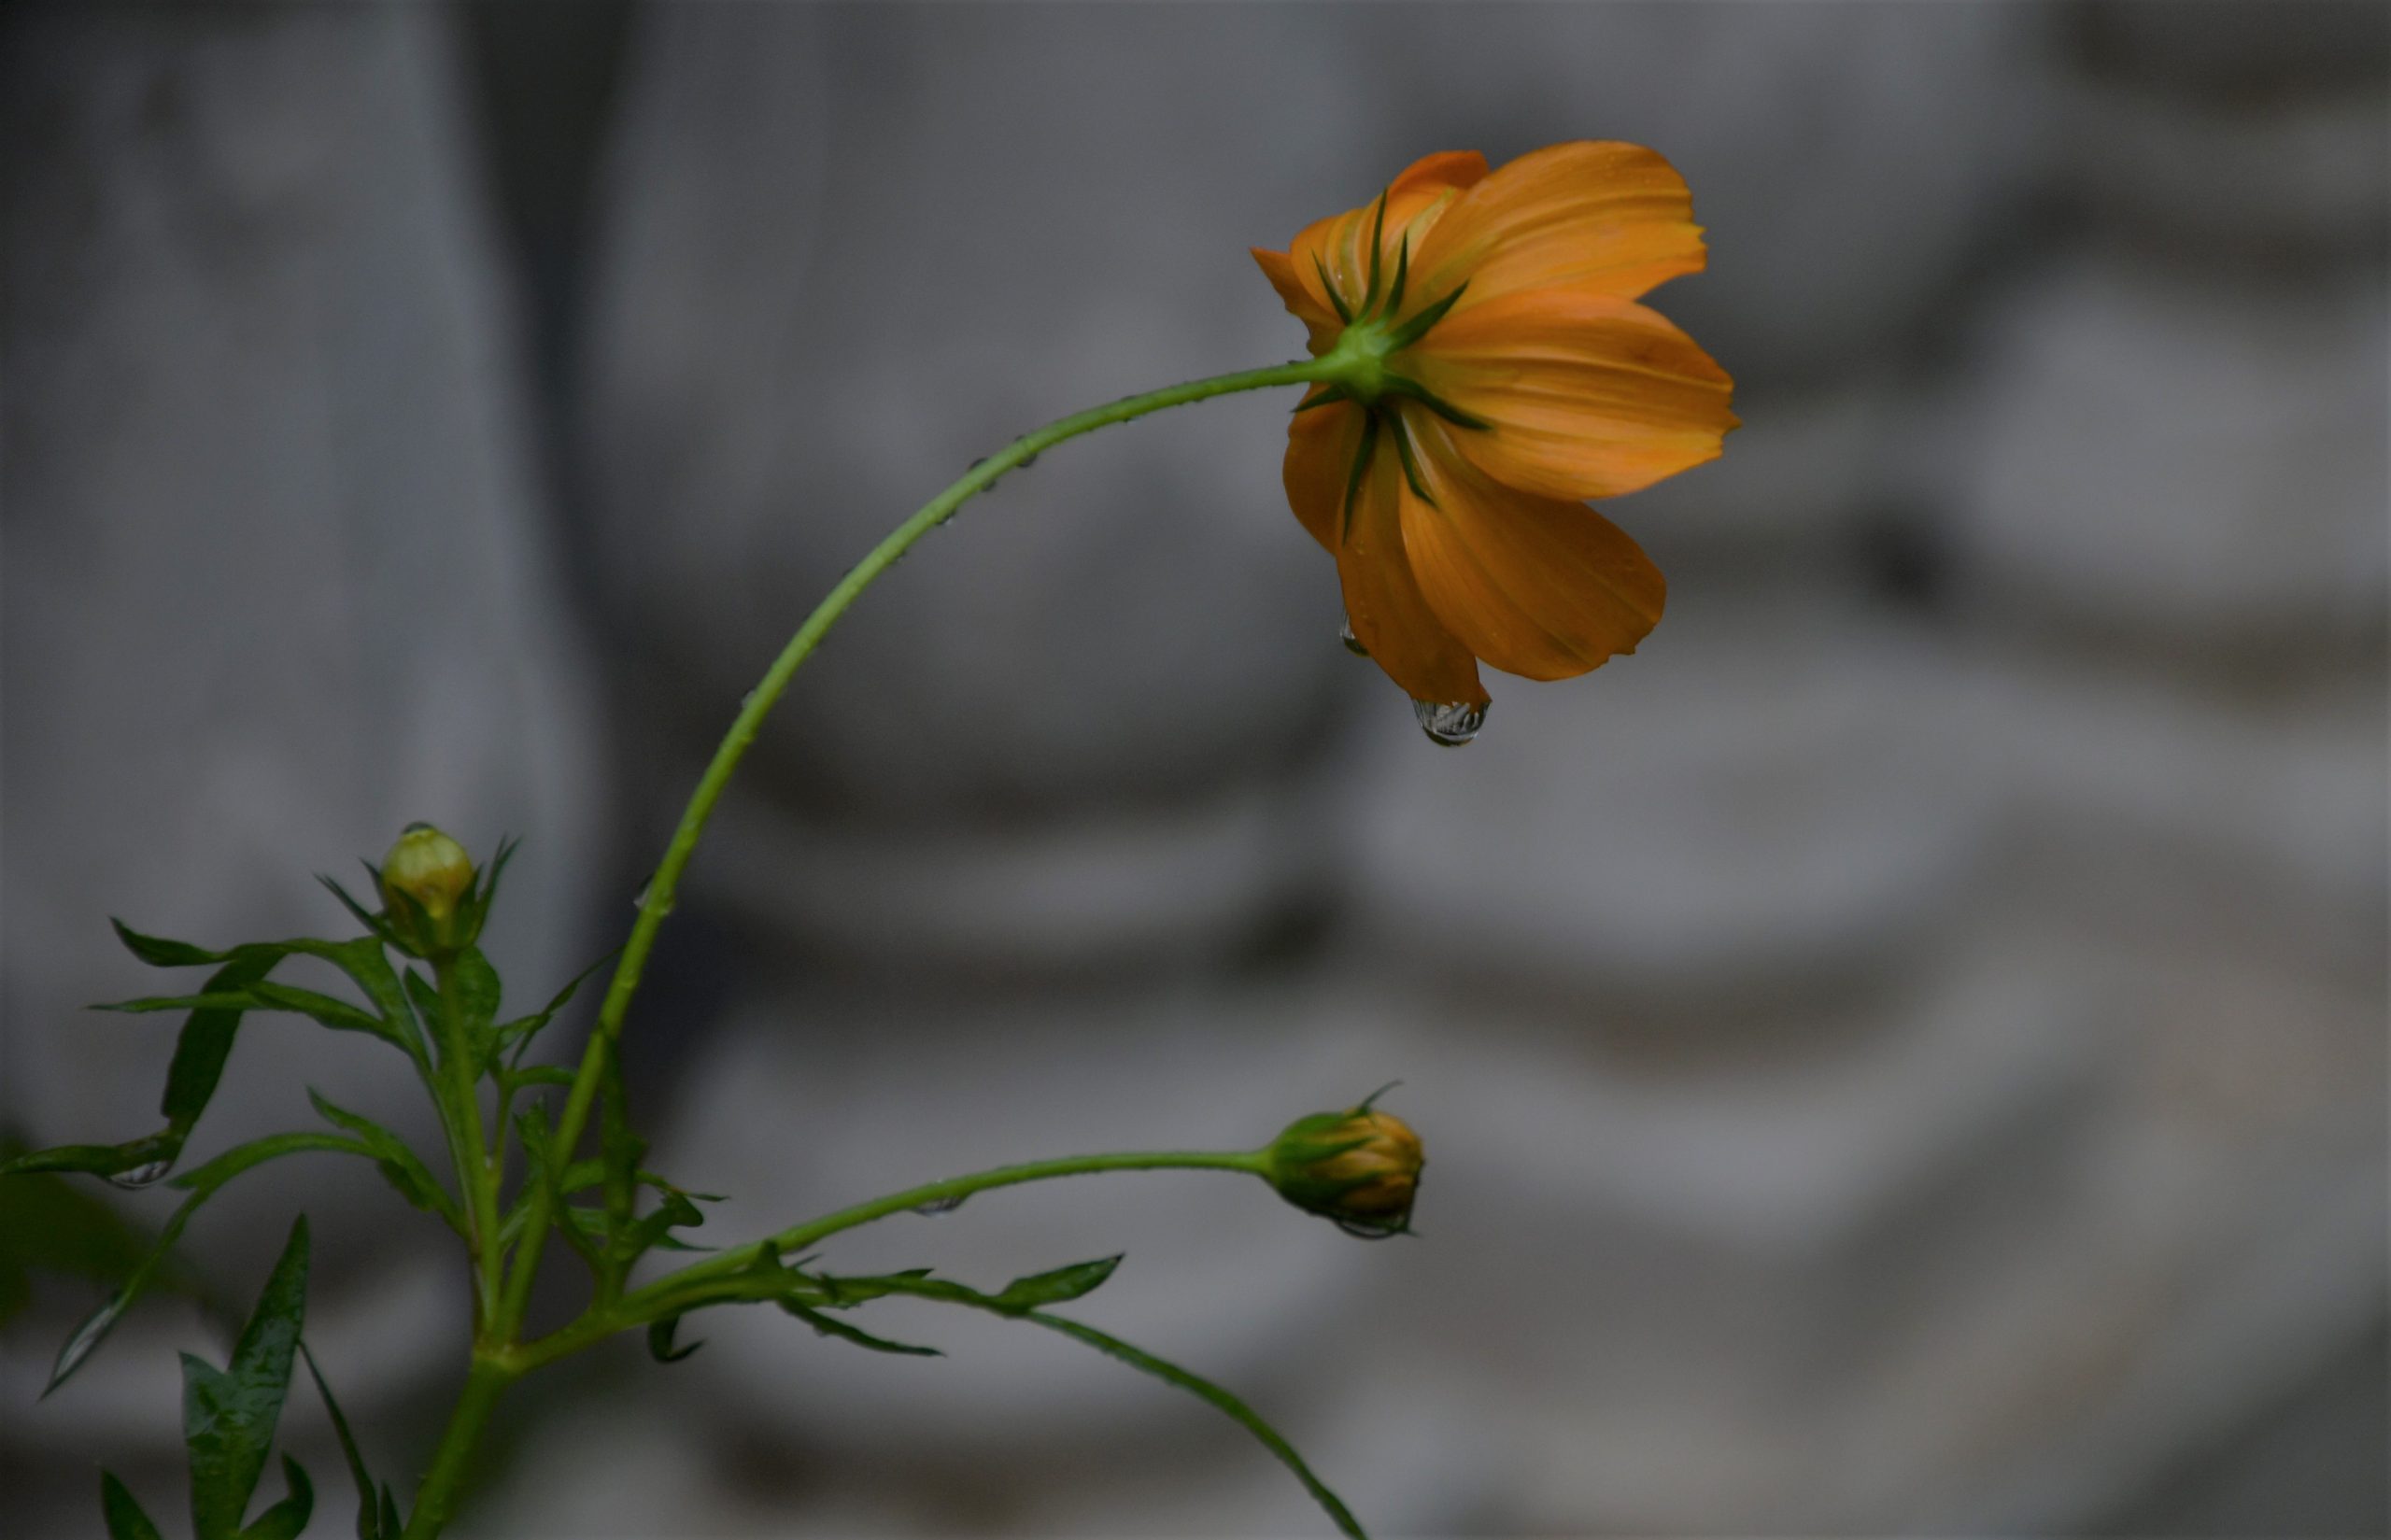 Water droplet on a Sulfur Cosmos flower